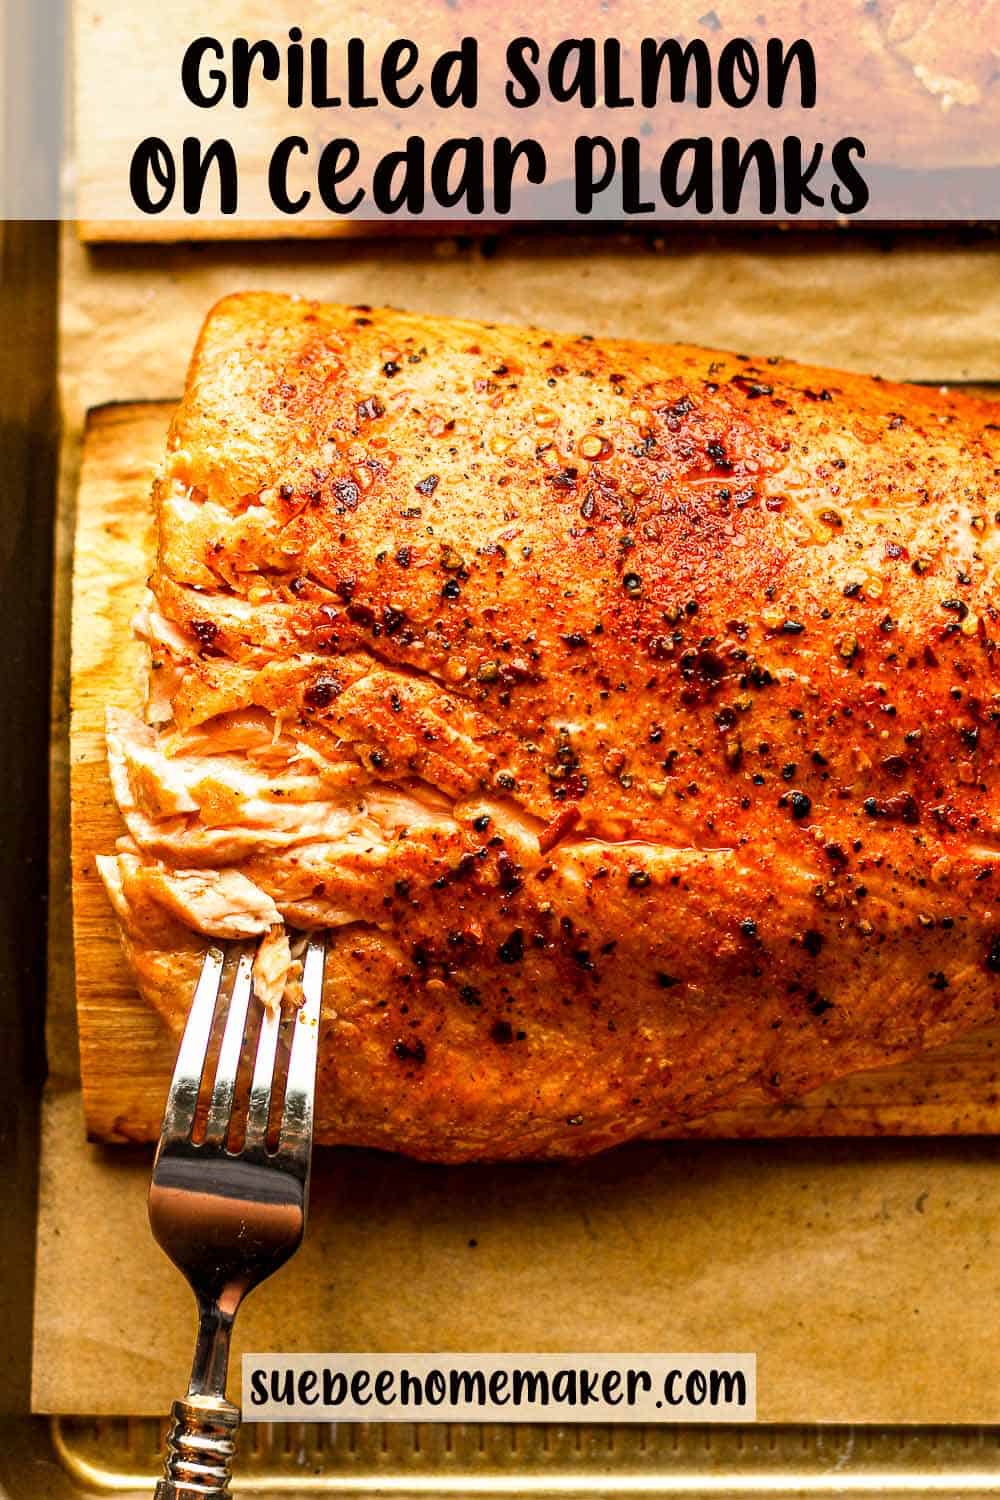 Closeup on a piece of grilled salmon on cedar planks with a fork.